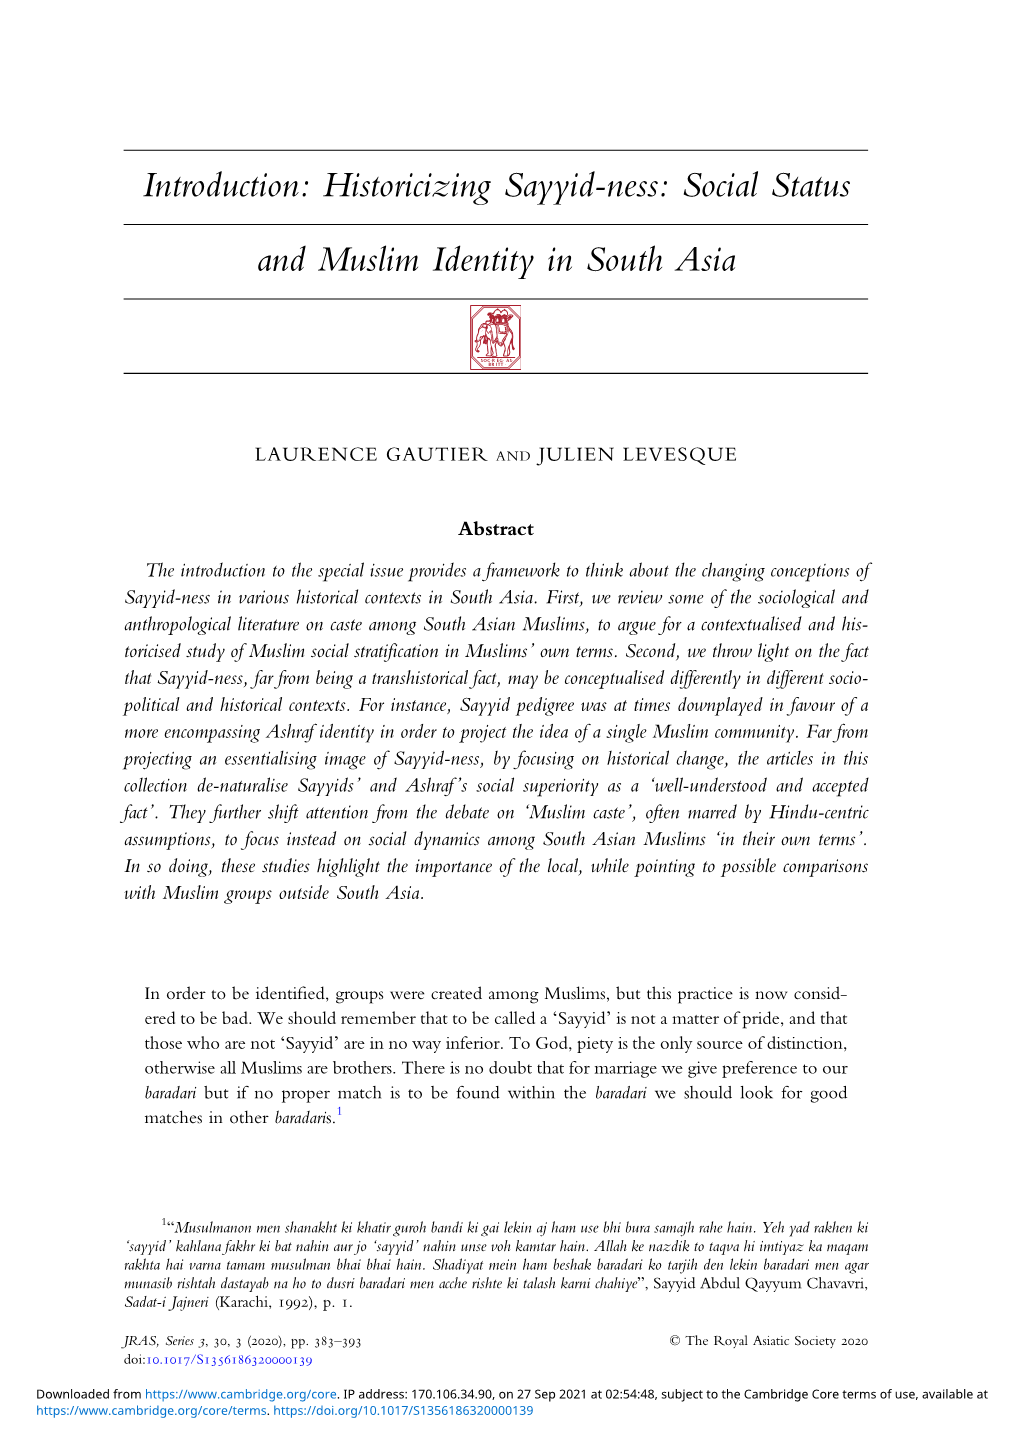 Introduction: Historicizing Sayyid-Ness: Social Status and Muslim Identity in South Asia